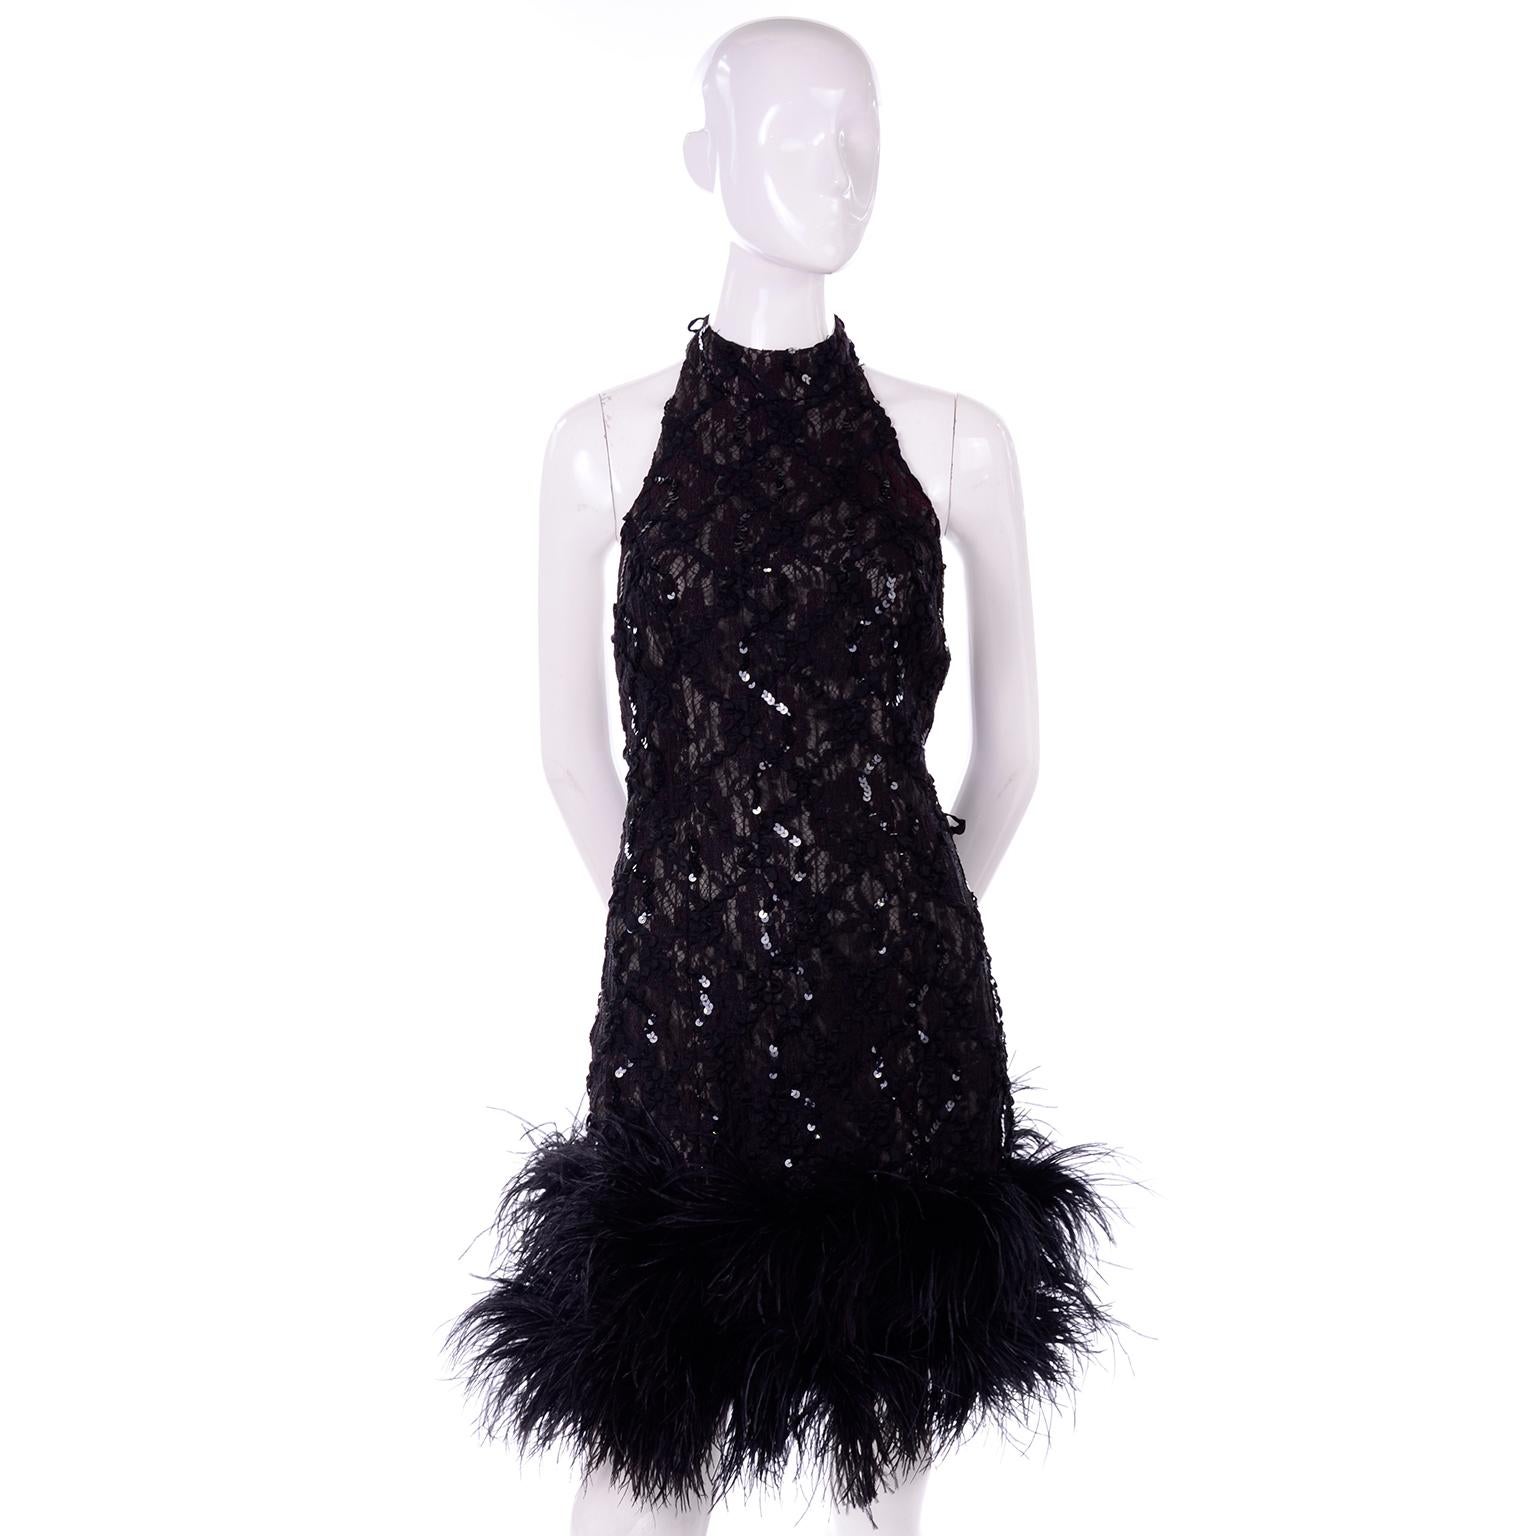 This is a stunning vintage black lace halter dress, covered with sequins and trimmed with black ostrich feathers. The dress has a halter neck and there is a small amount of burgundy in the lace.  Perfect for cocktail parties, special occasions and